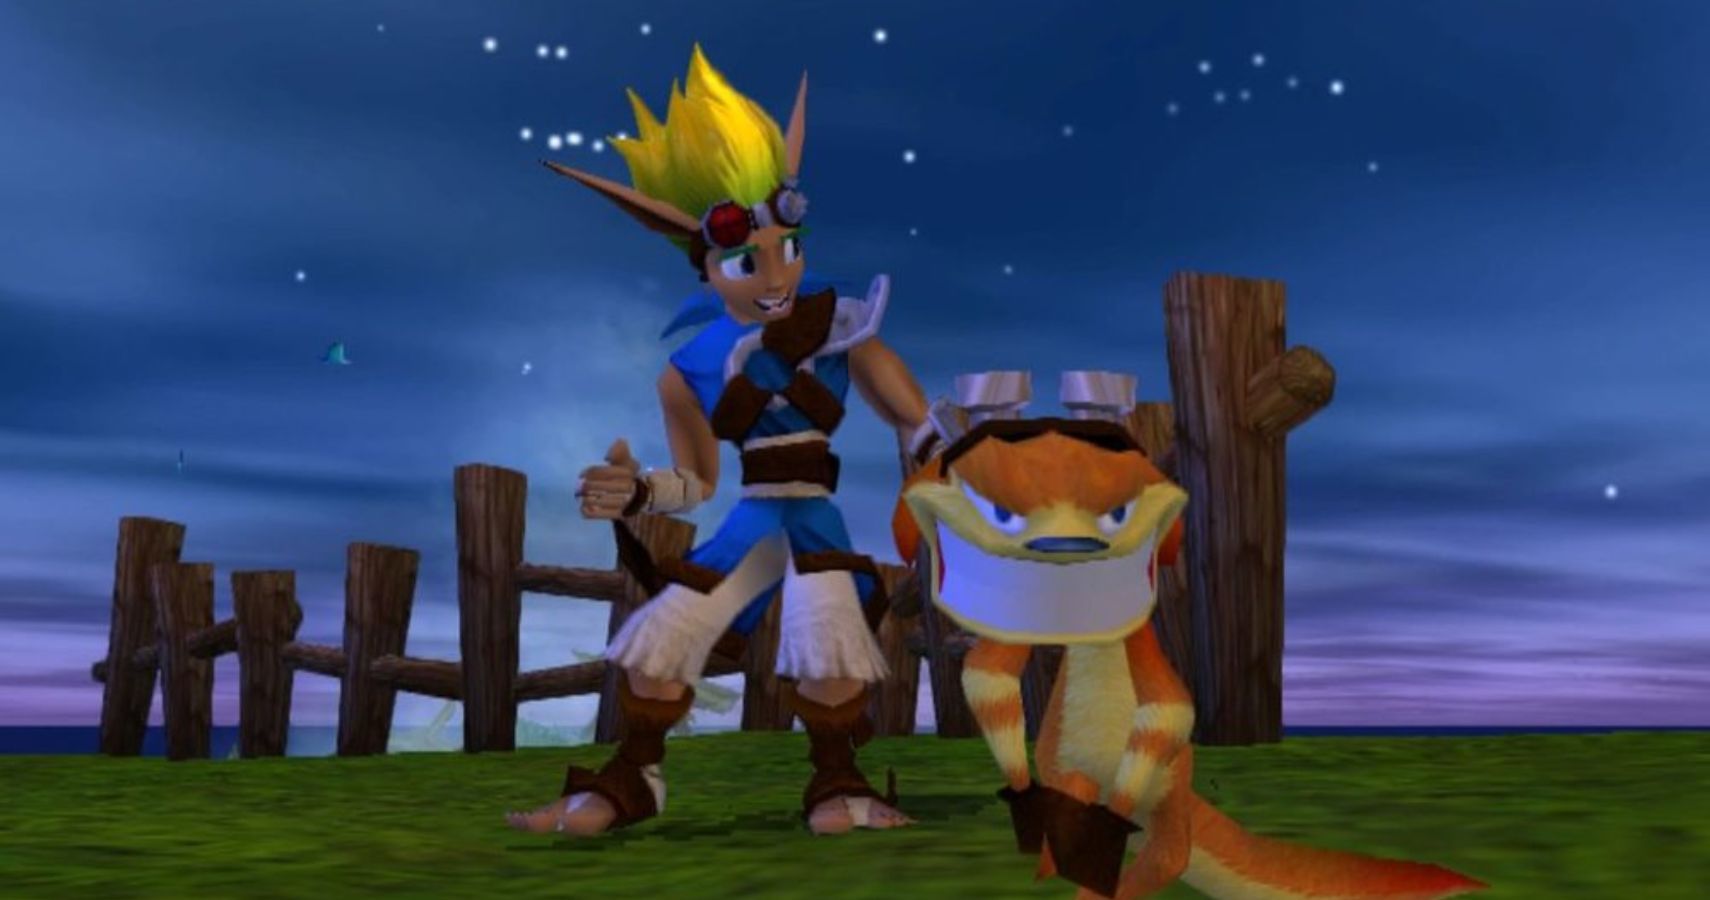 jak and daxter smiling